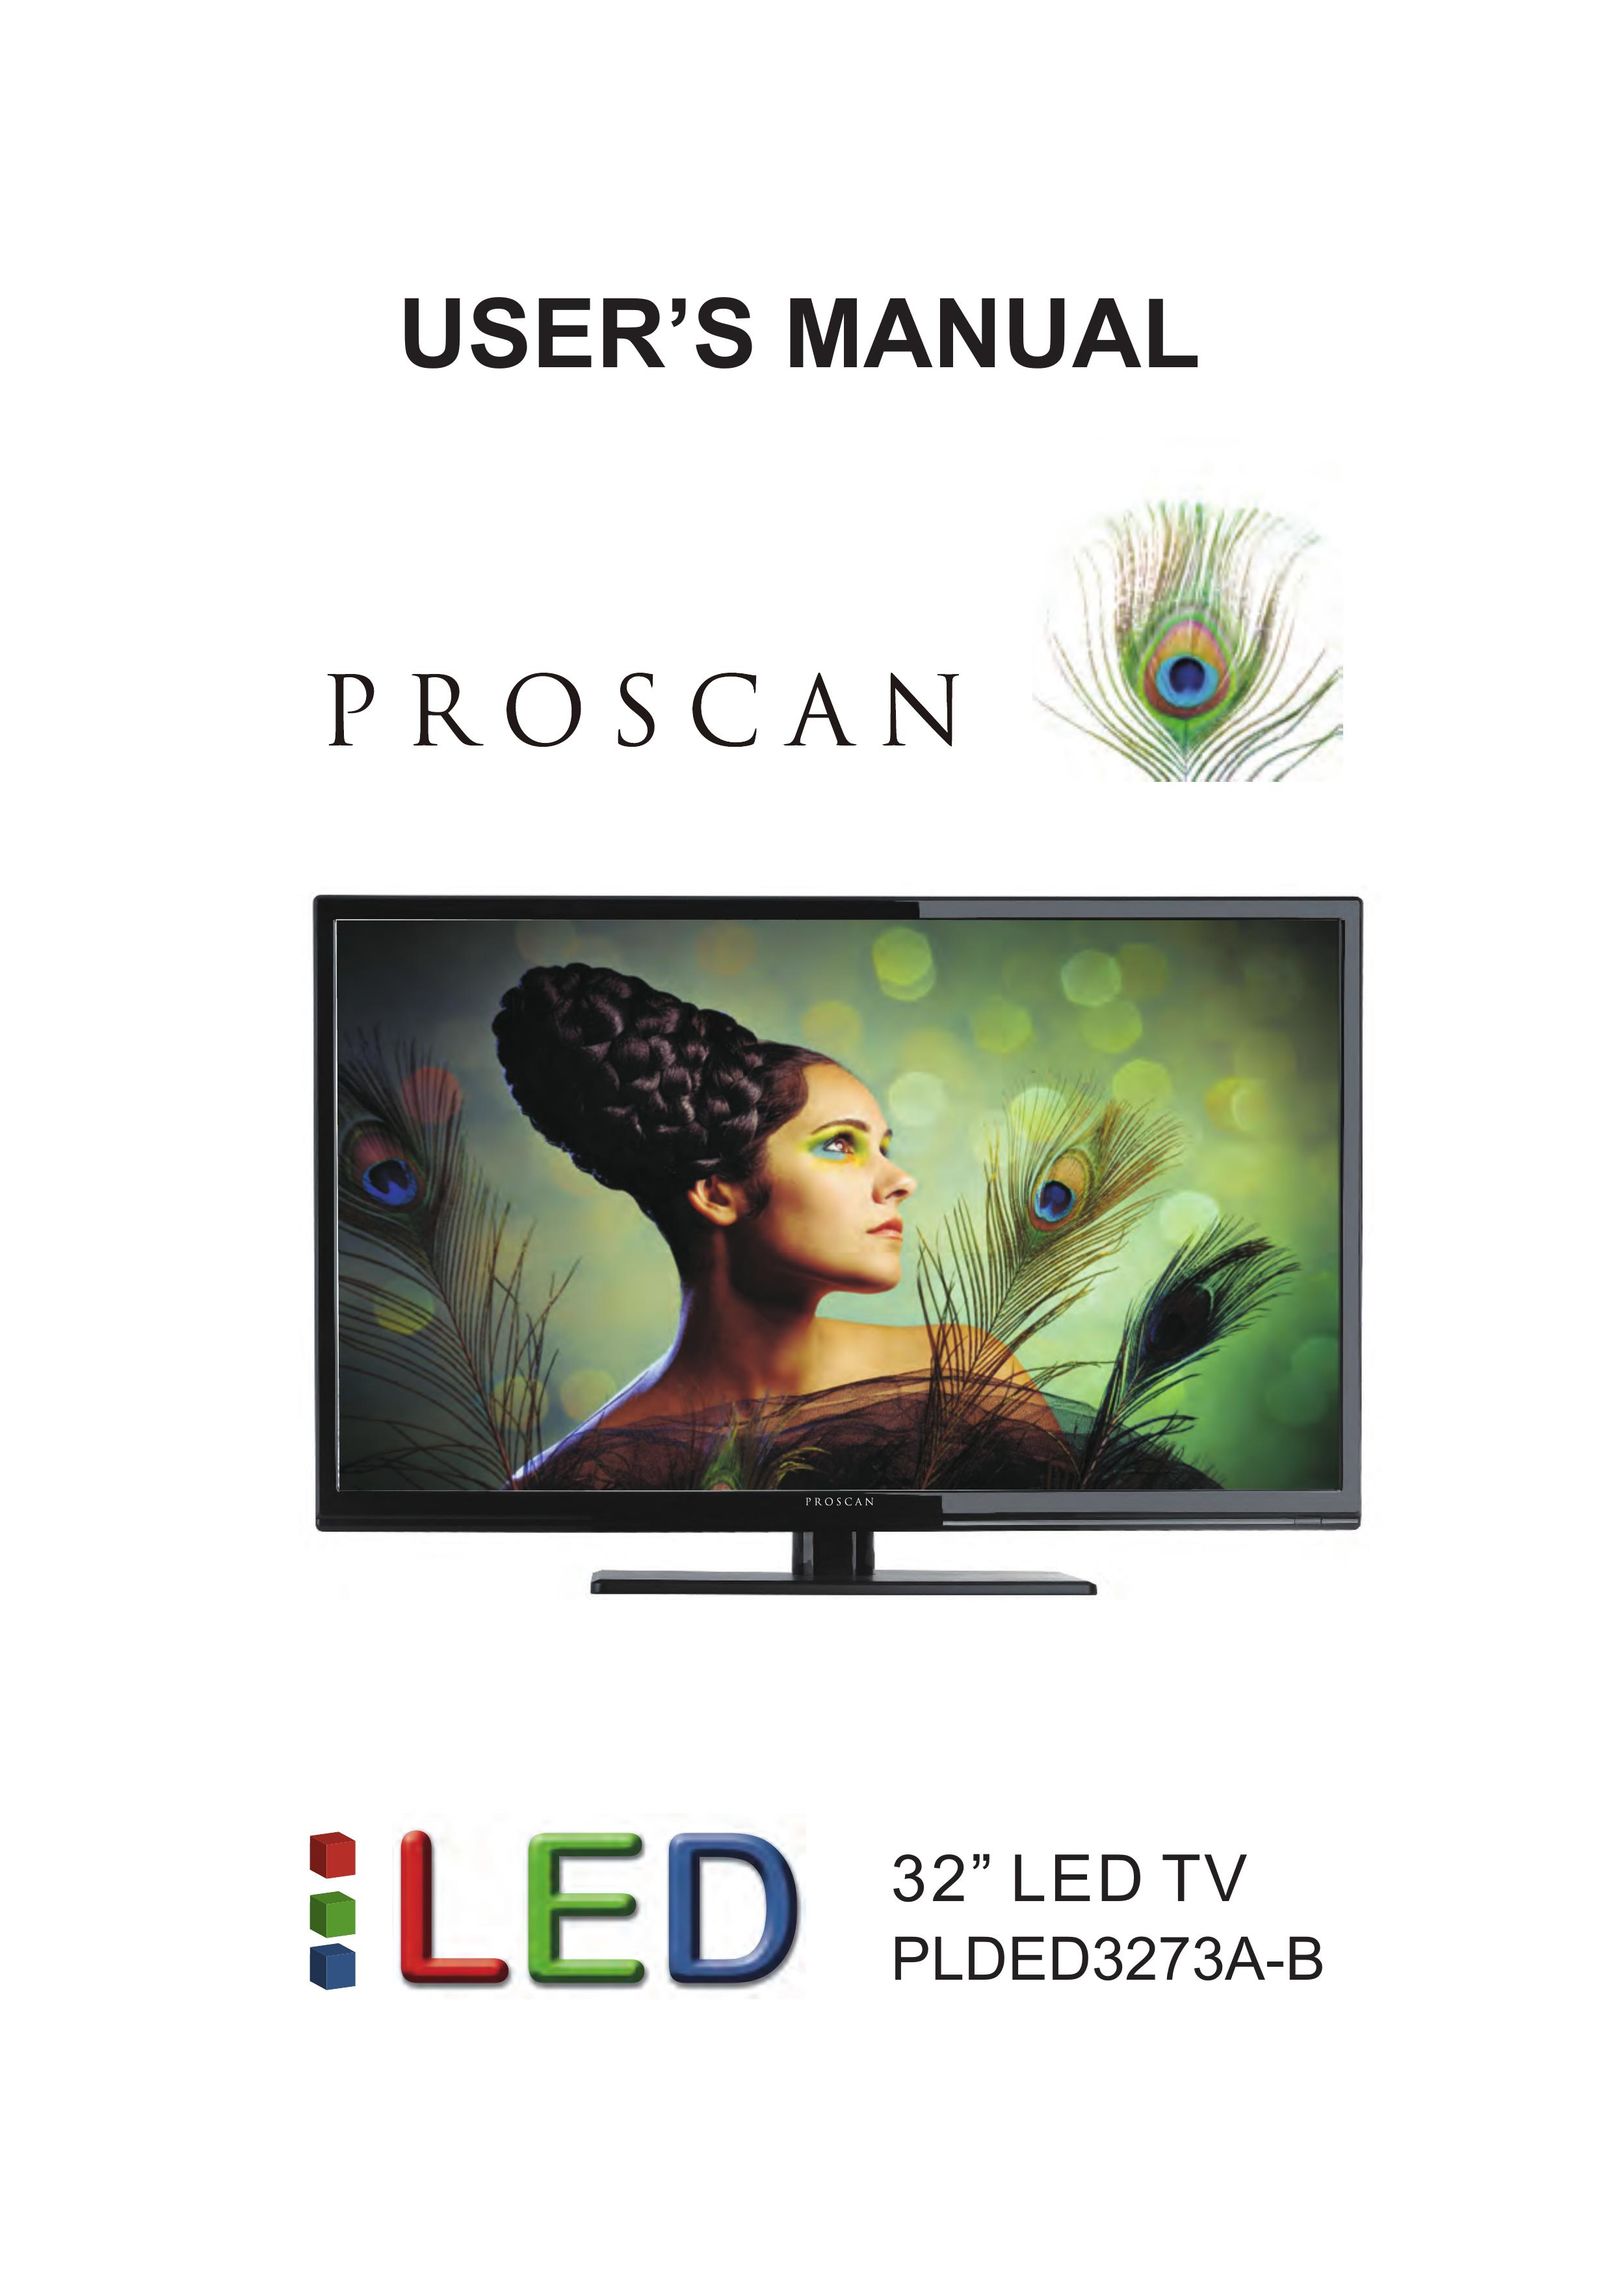 ProScan PLDED3273A-B Flat Panel Television User Manual